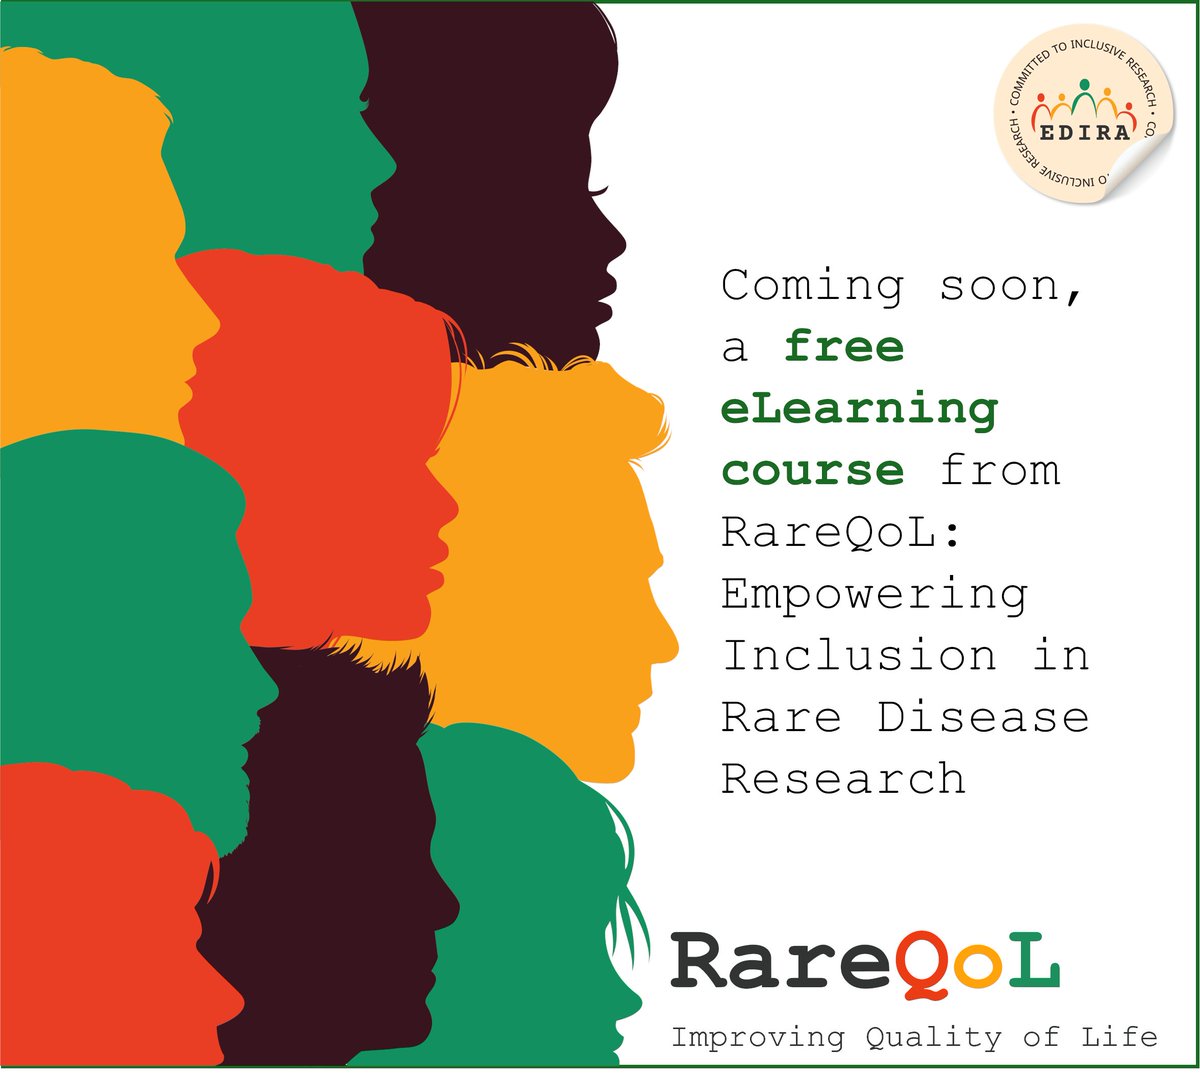 Coming soon: 'Empowering Inclusion in Rare Disease Research', a free eLearning course for EDIRA Building Trust Symposium participants & RCNet members.  Discover key strategies for inclusive research. #RareQoL #InclusiveResearch #EDIRA
Get Tickets today!
eventbrite.co.uk/e/674348172537…